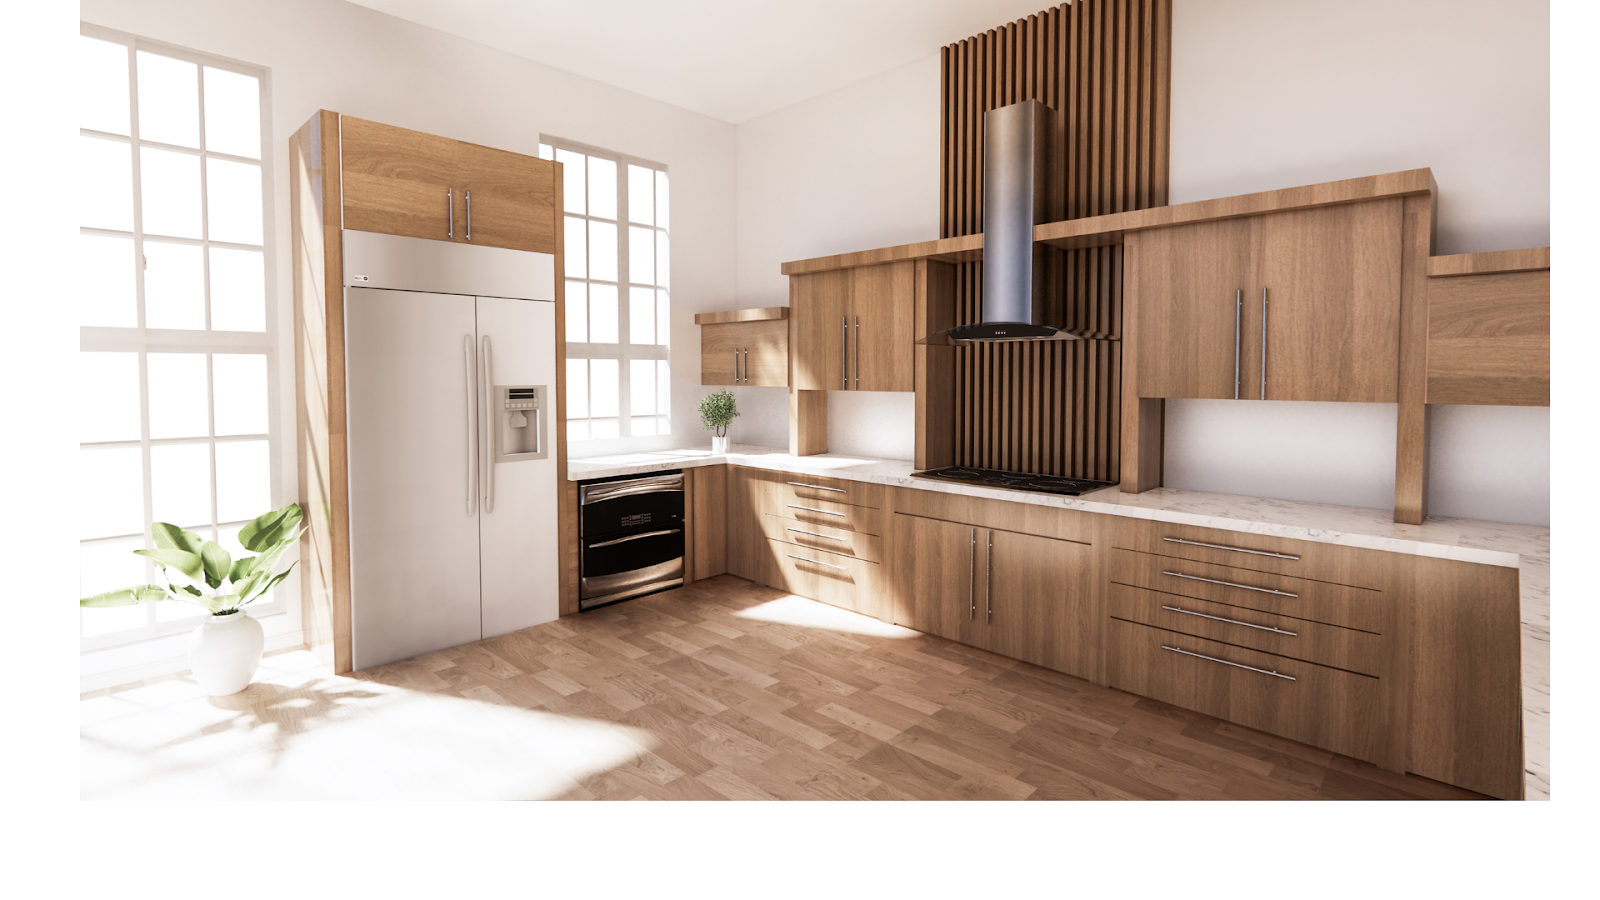 A kitchen with a wooden floor